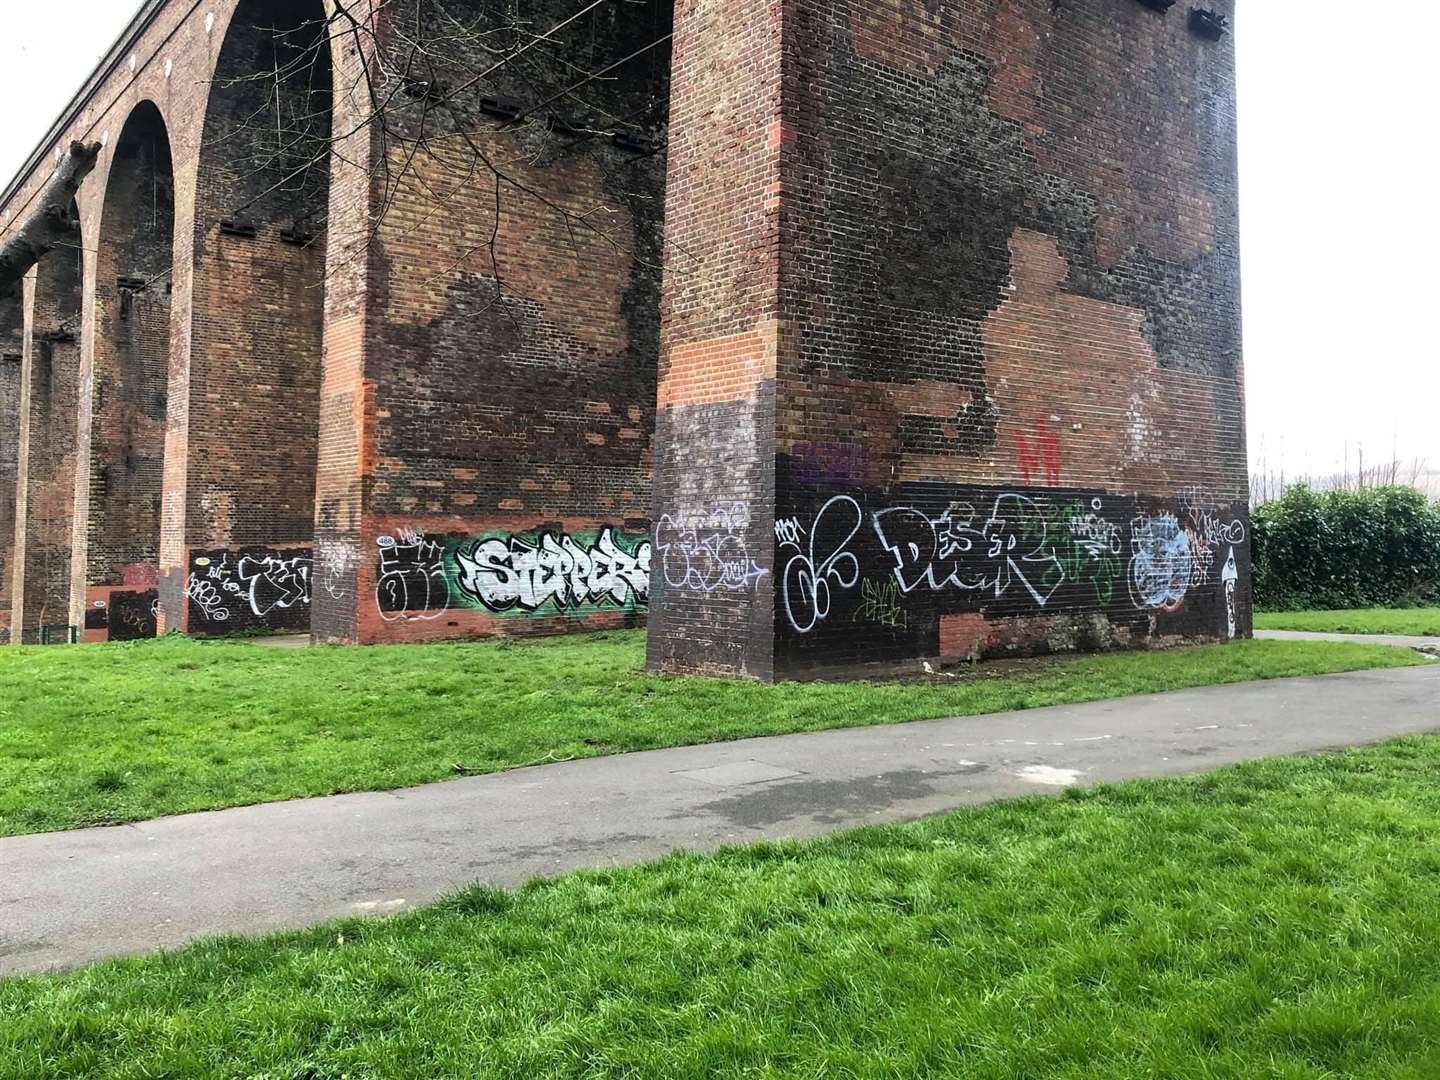 The Folkestone Town Sprucer team have seen a rise in the amount of graffiti vandalism in the town in recent weeks